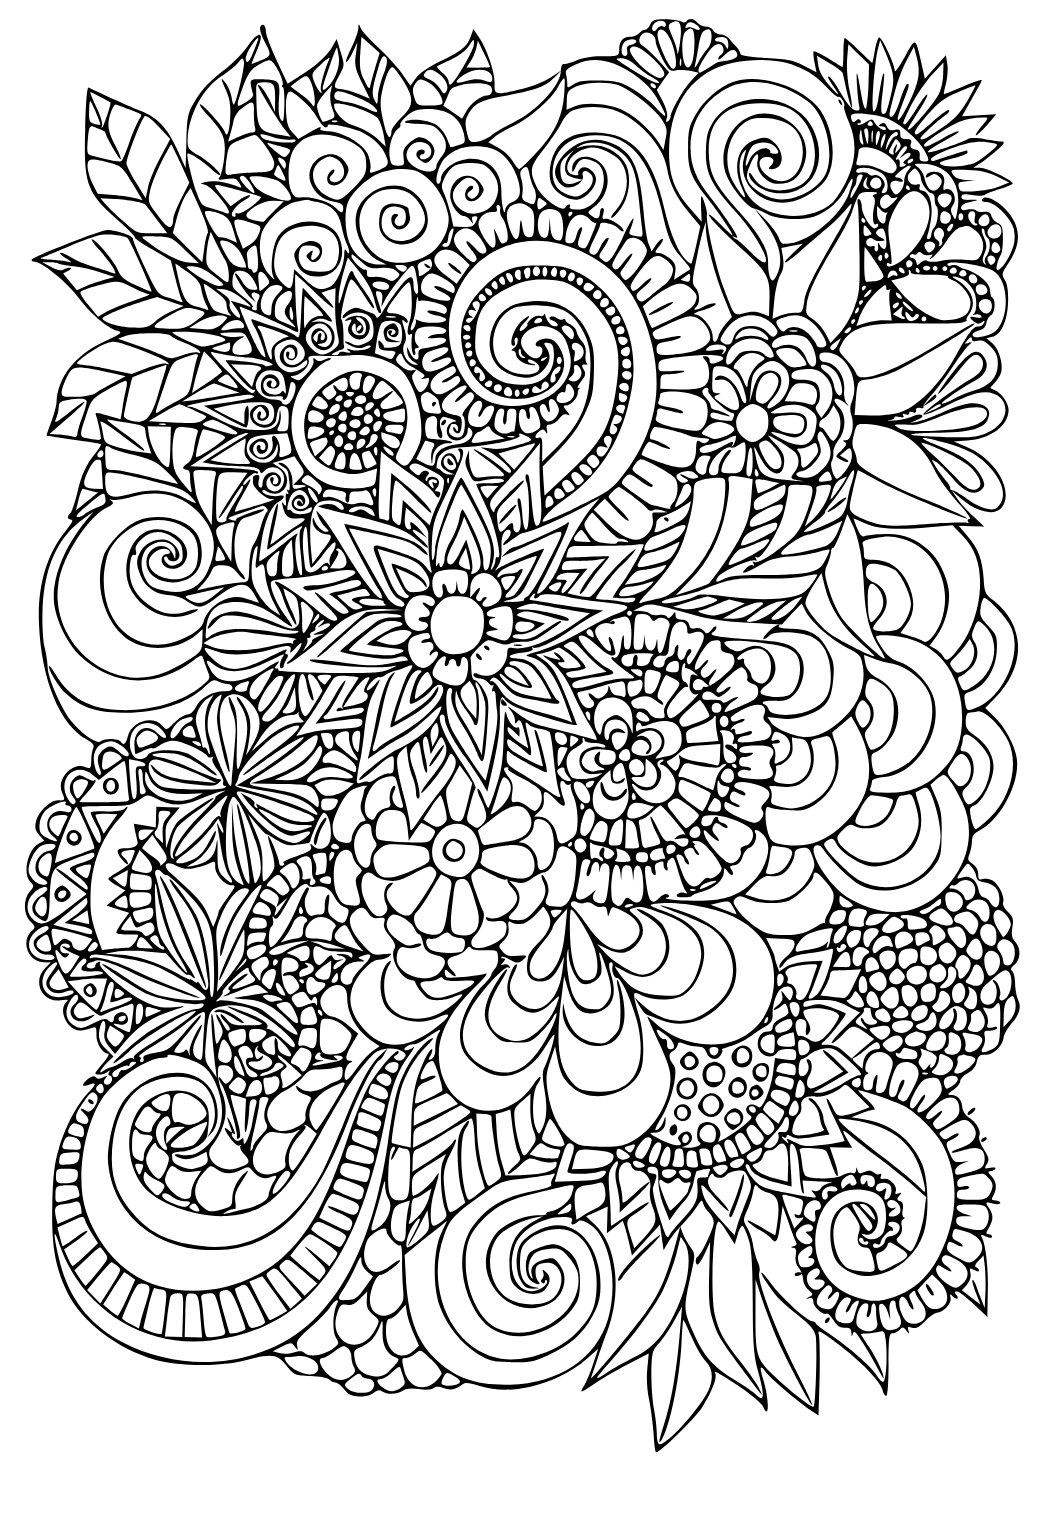 Zentangle Flowers Coloring Book with: Flowers, Trees, Succulents